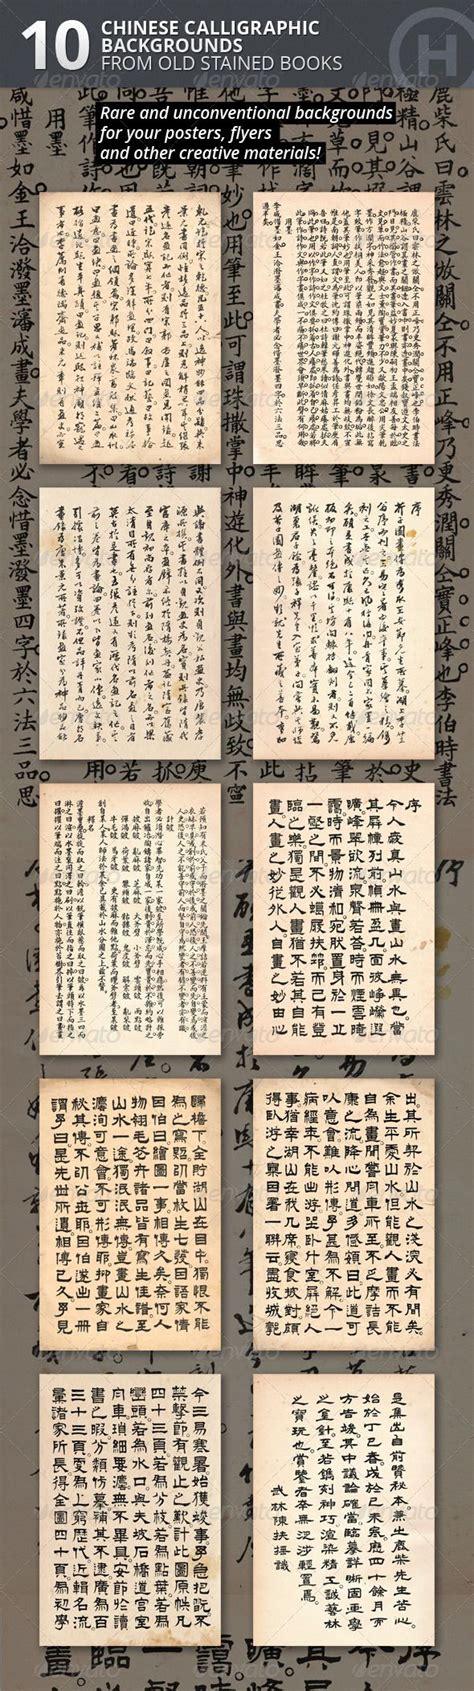 10 Old Stained Chinese Calligraphic Backgrounds Chinese Typography